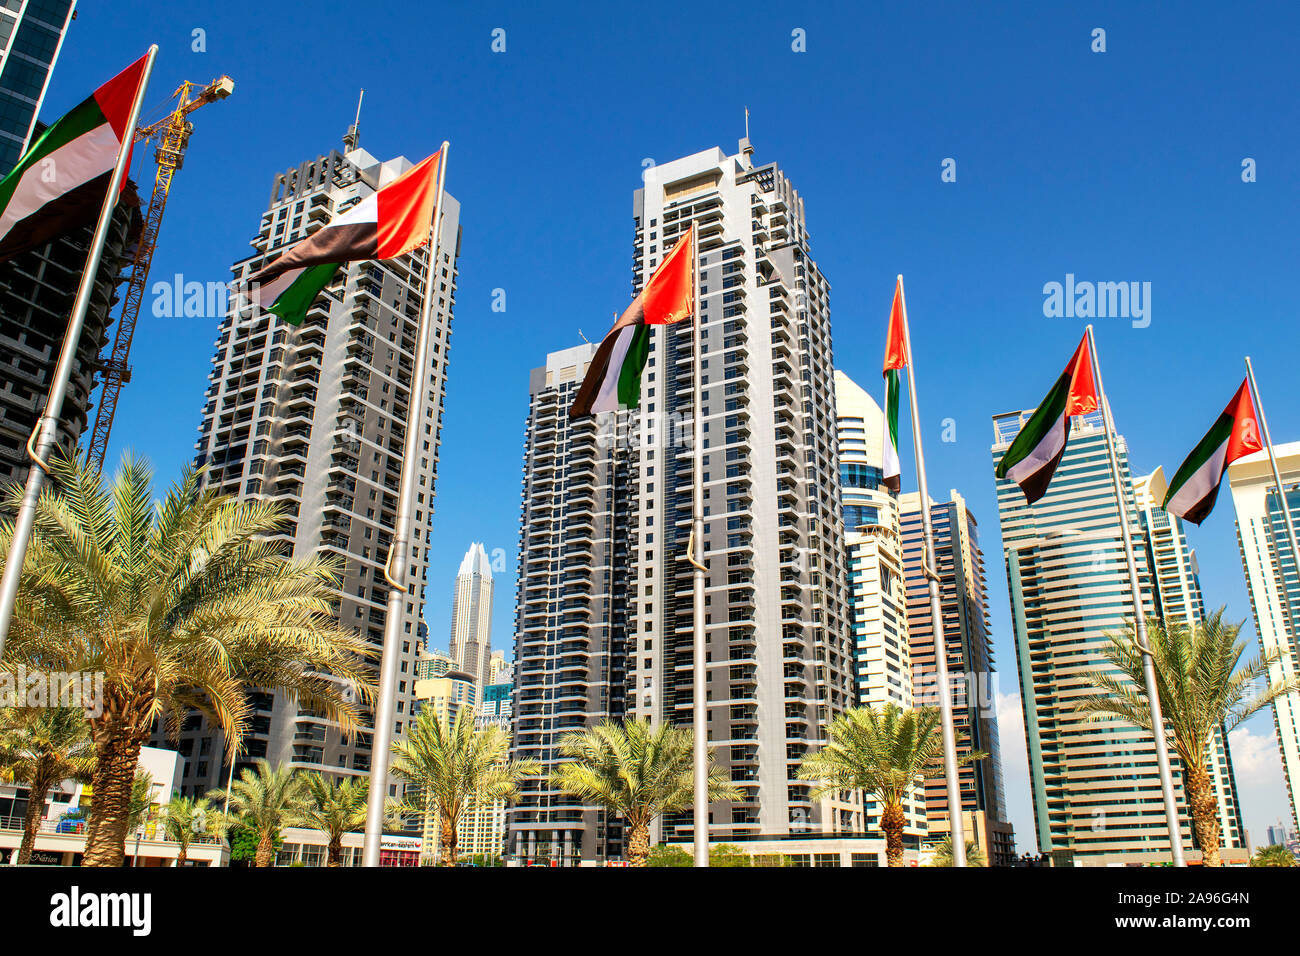 Dubai / UAE - November 11, 2019: View of JLT skyscrapers with UAE flags. United Arab Emirates flags waving on blue sky background. National day. Group Stock Photo